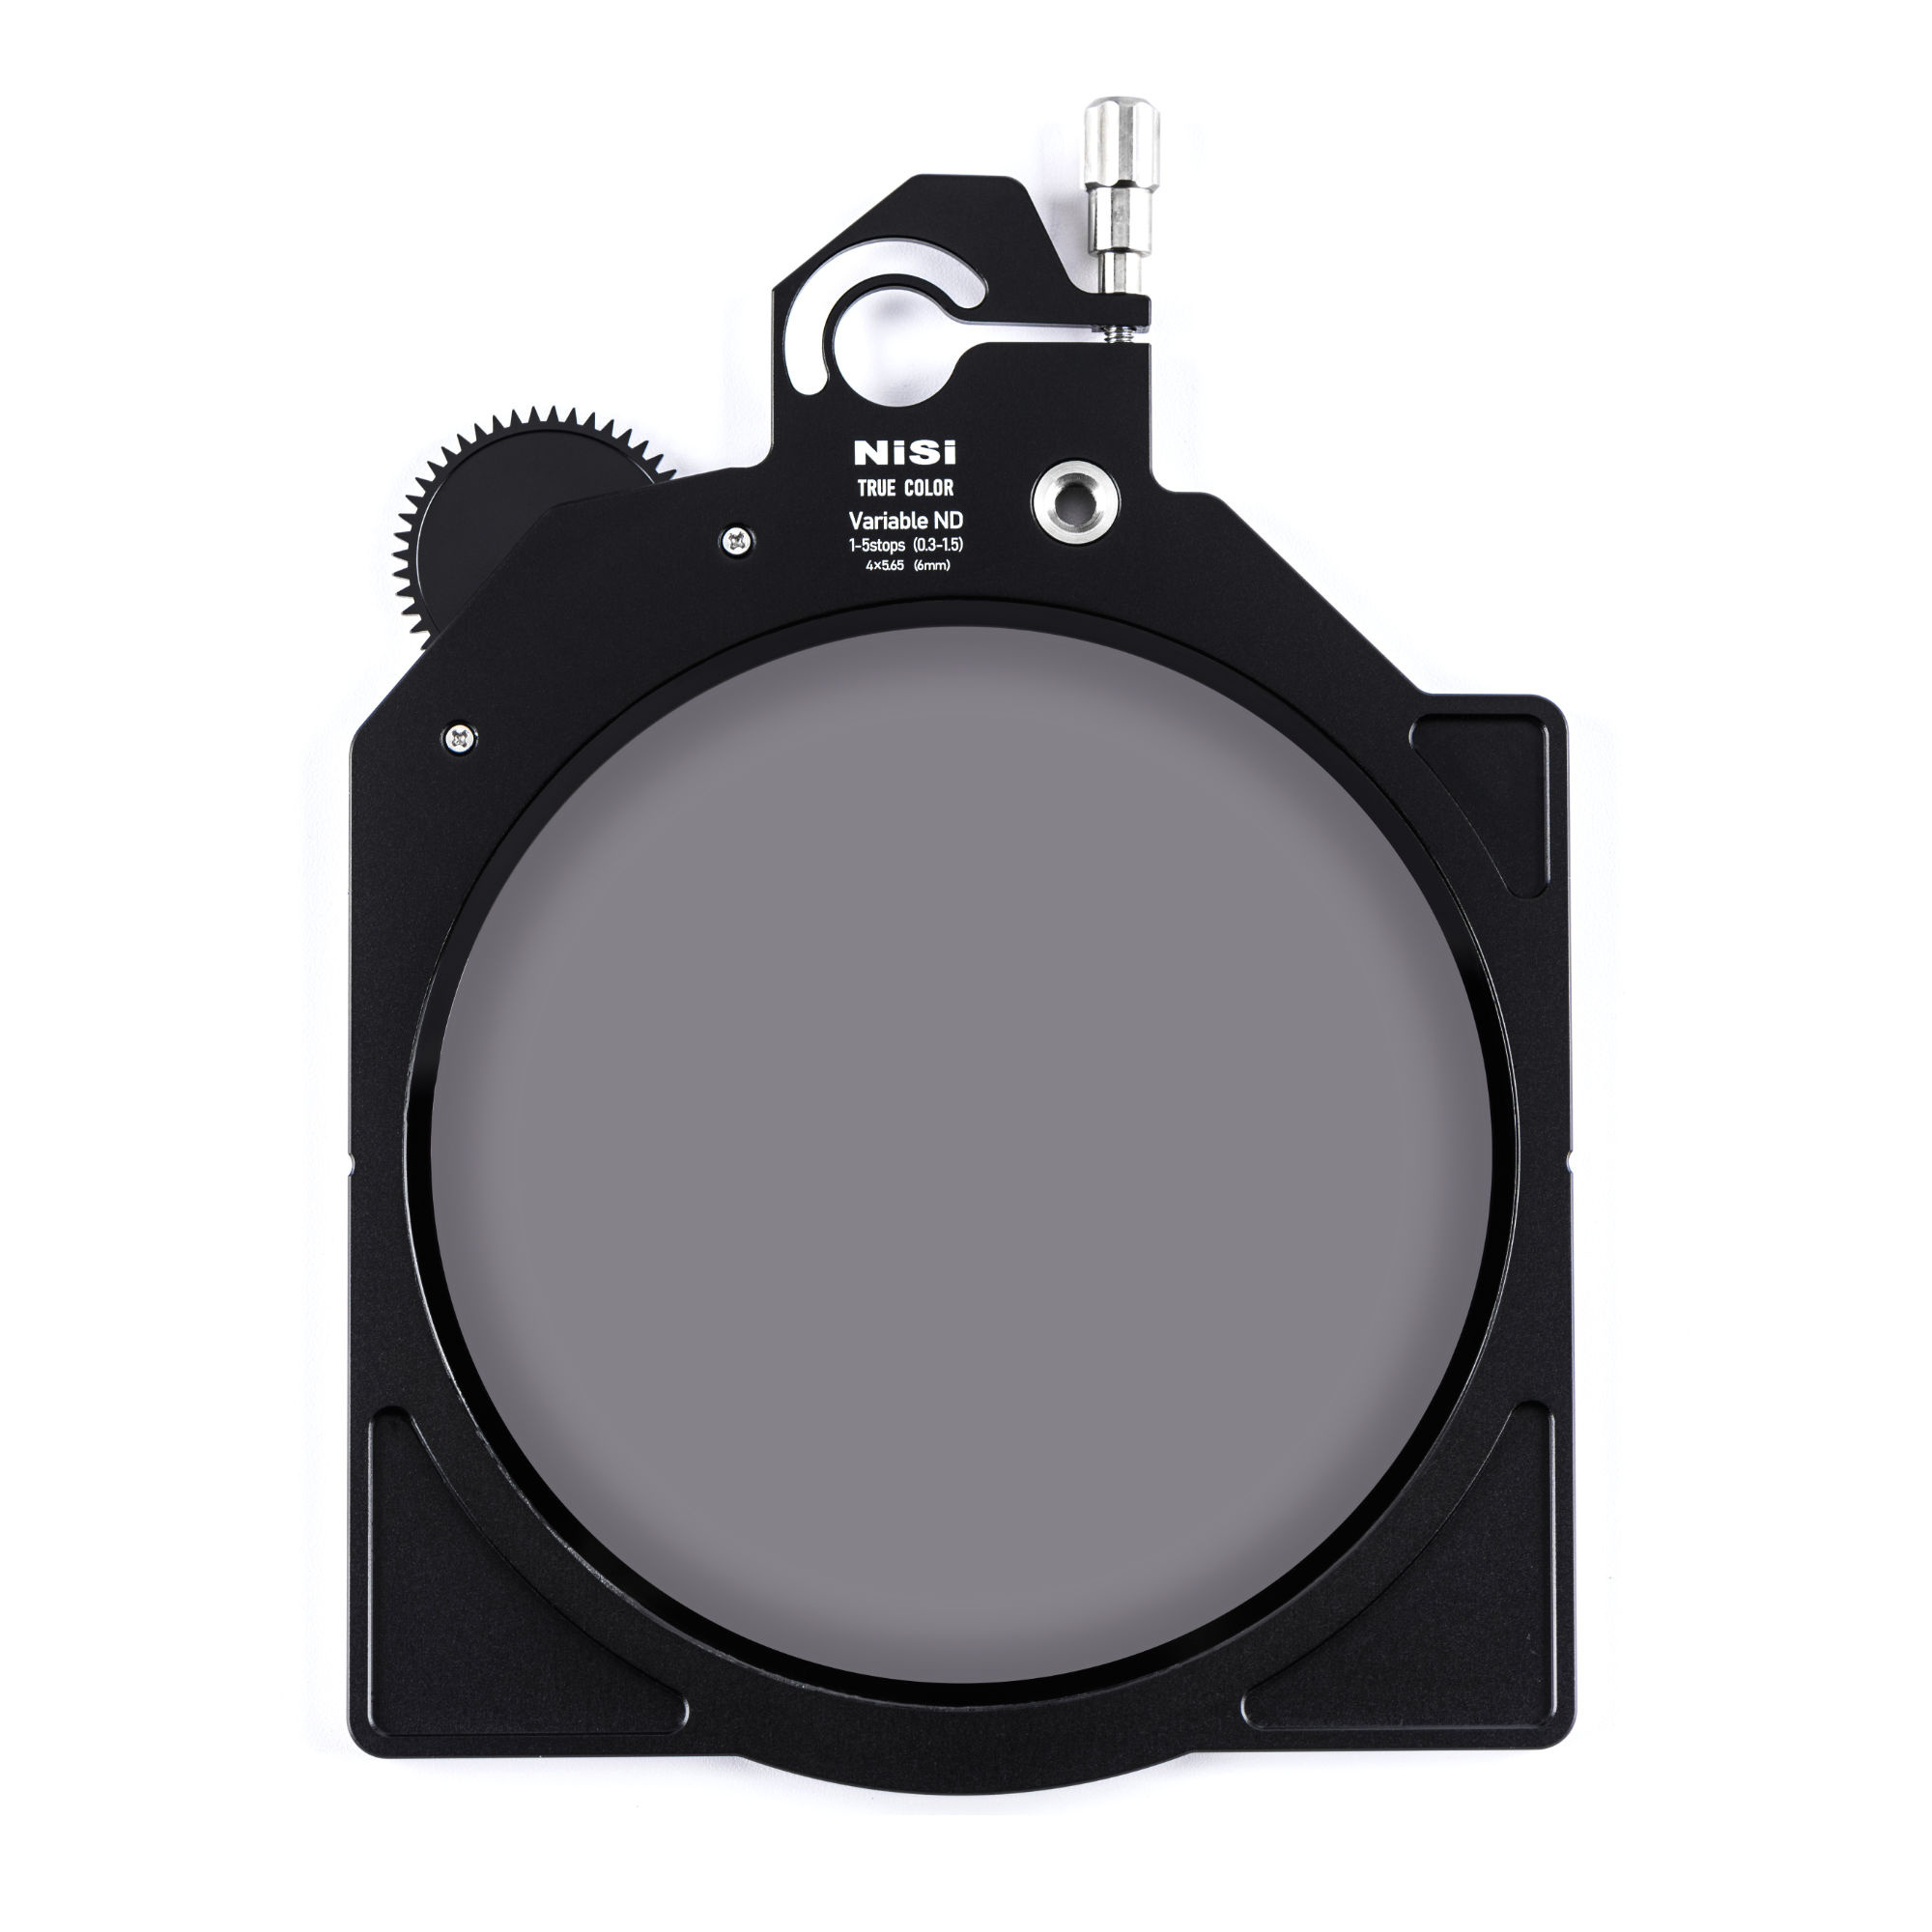 NiSi Cinema 4x5.65" (6mm) True Color Variable ND 1-5 Stops (0.3-1.5) Filter